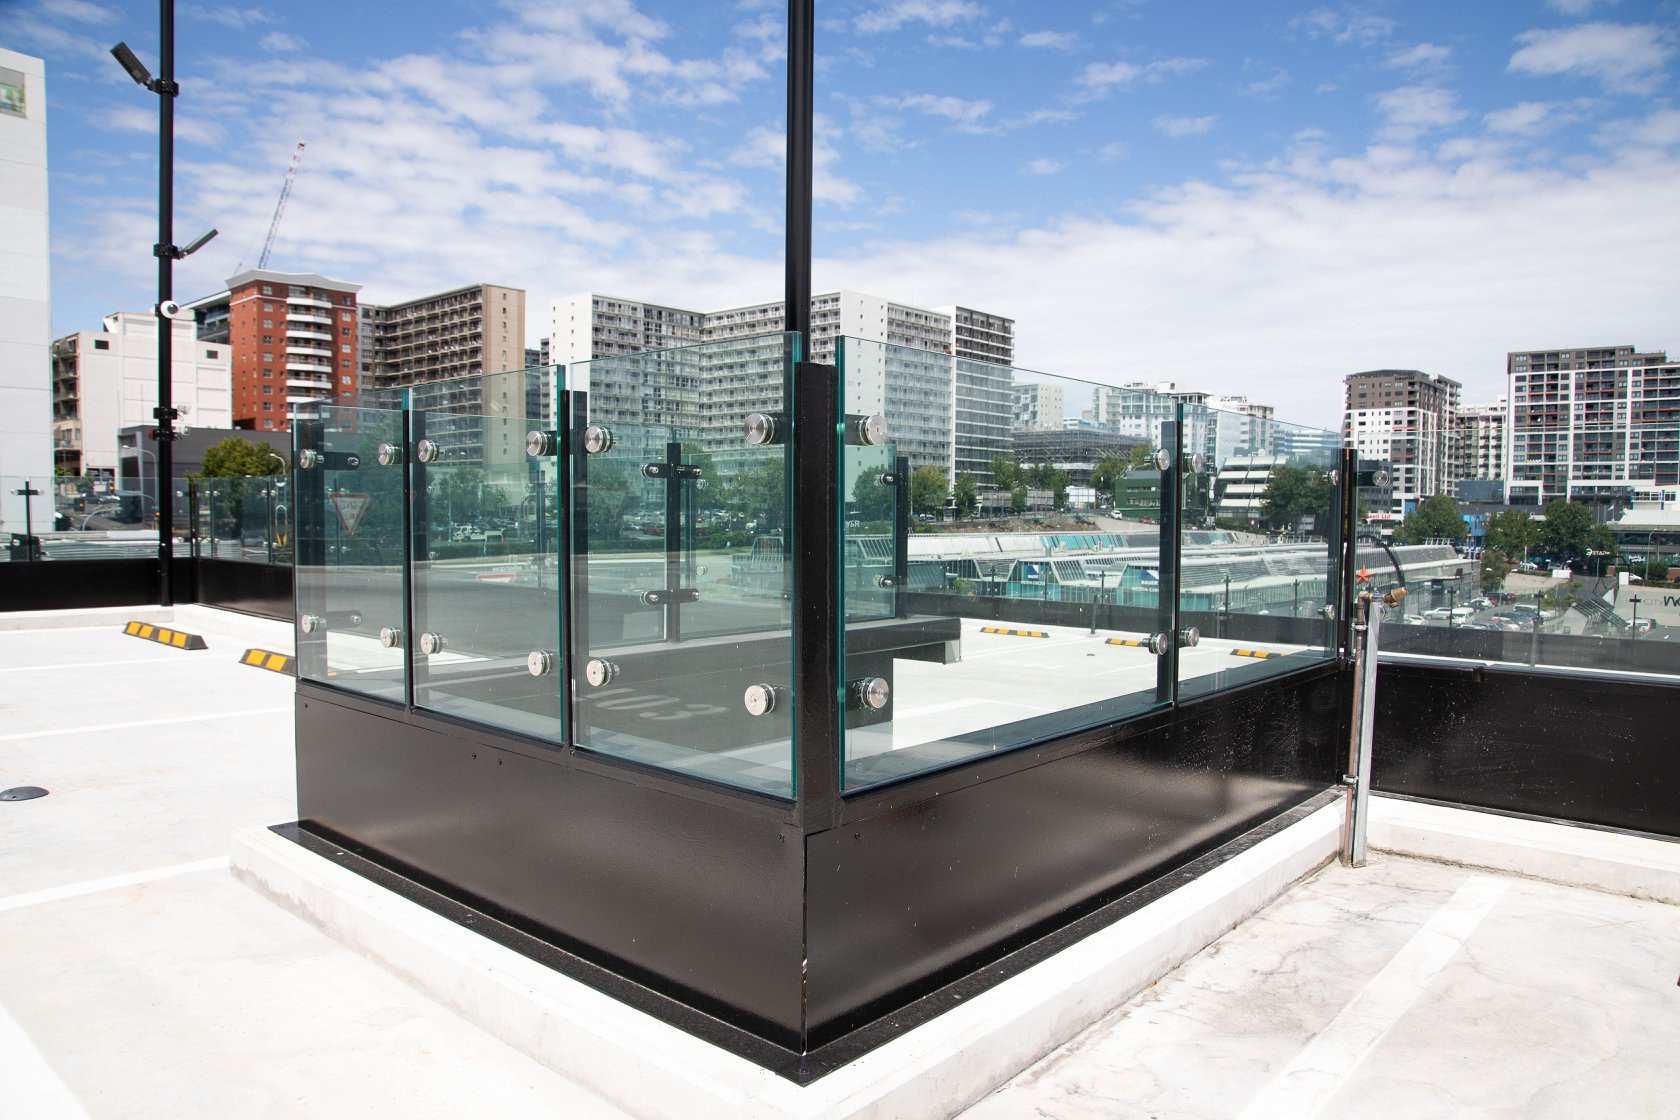 Transparent safety balustrades made of glass, offering a panoramic overlook of the urban horizon